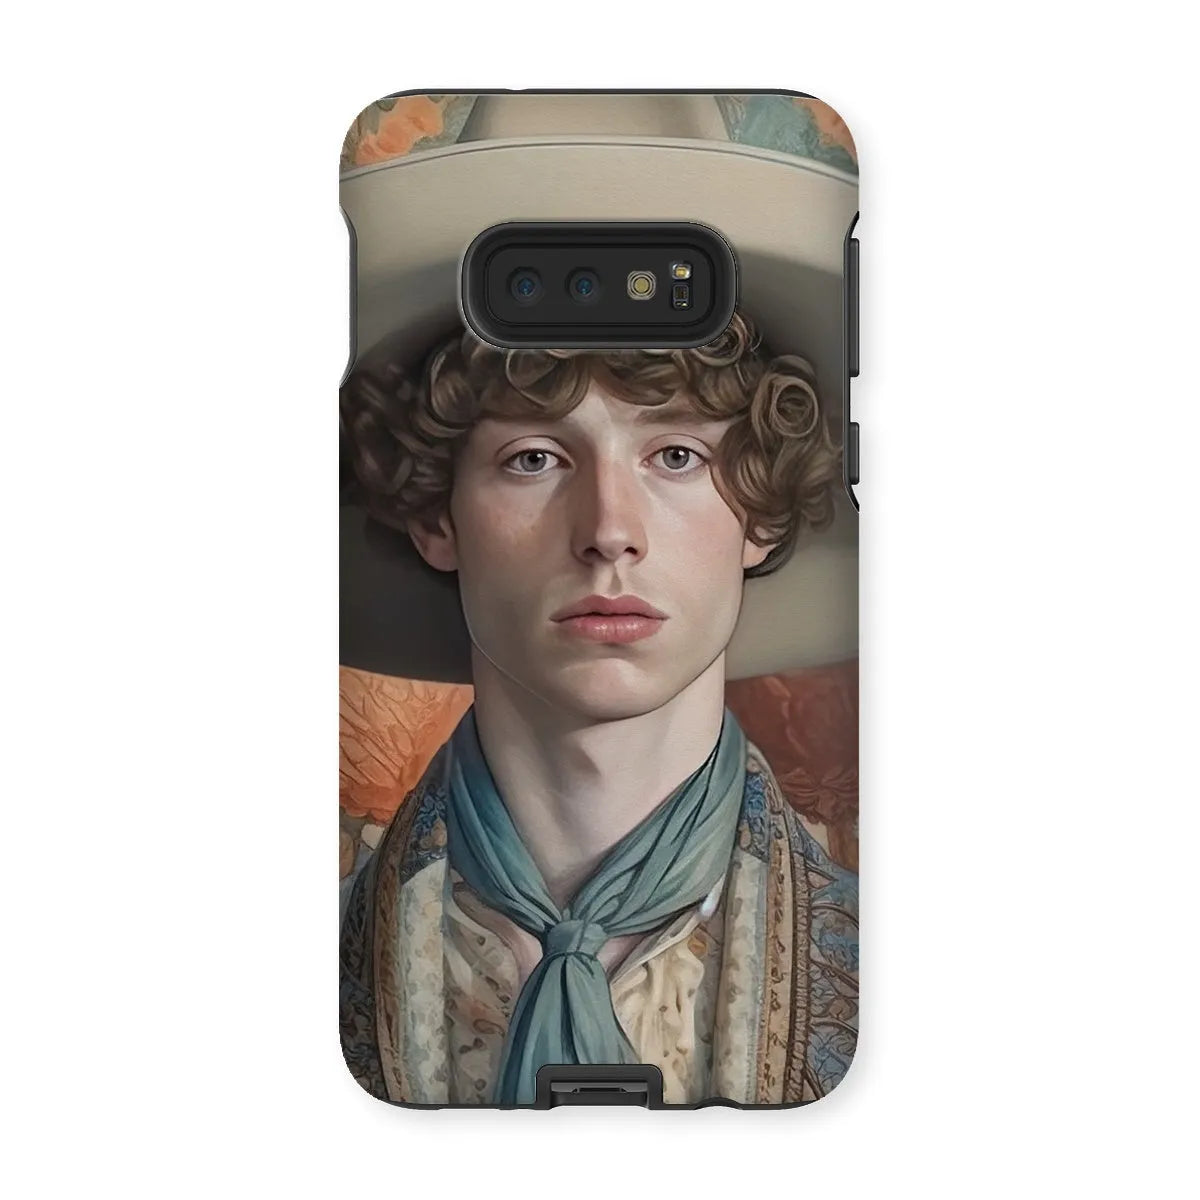 Theodore The Gay Cowboy - Dandy Gay Men Art Phone Case - Samsung Galaxy S10e / Matte - Mobile Phone Cases - Aesthetic